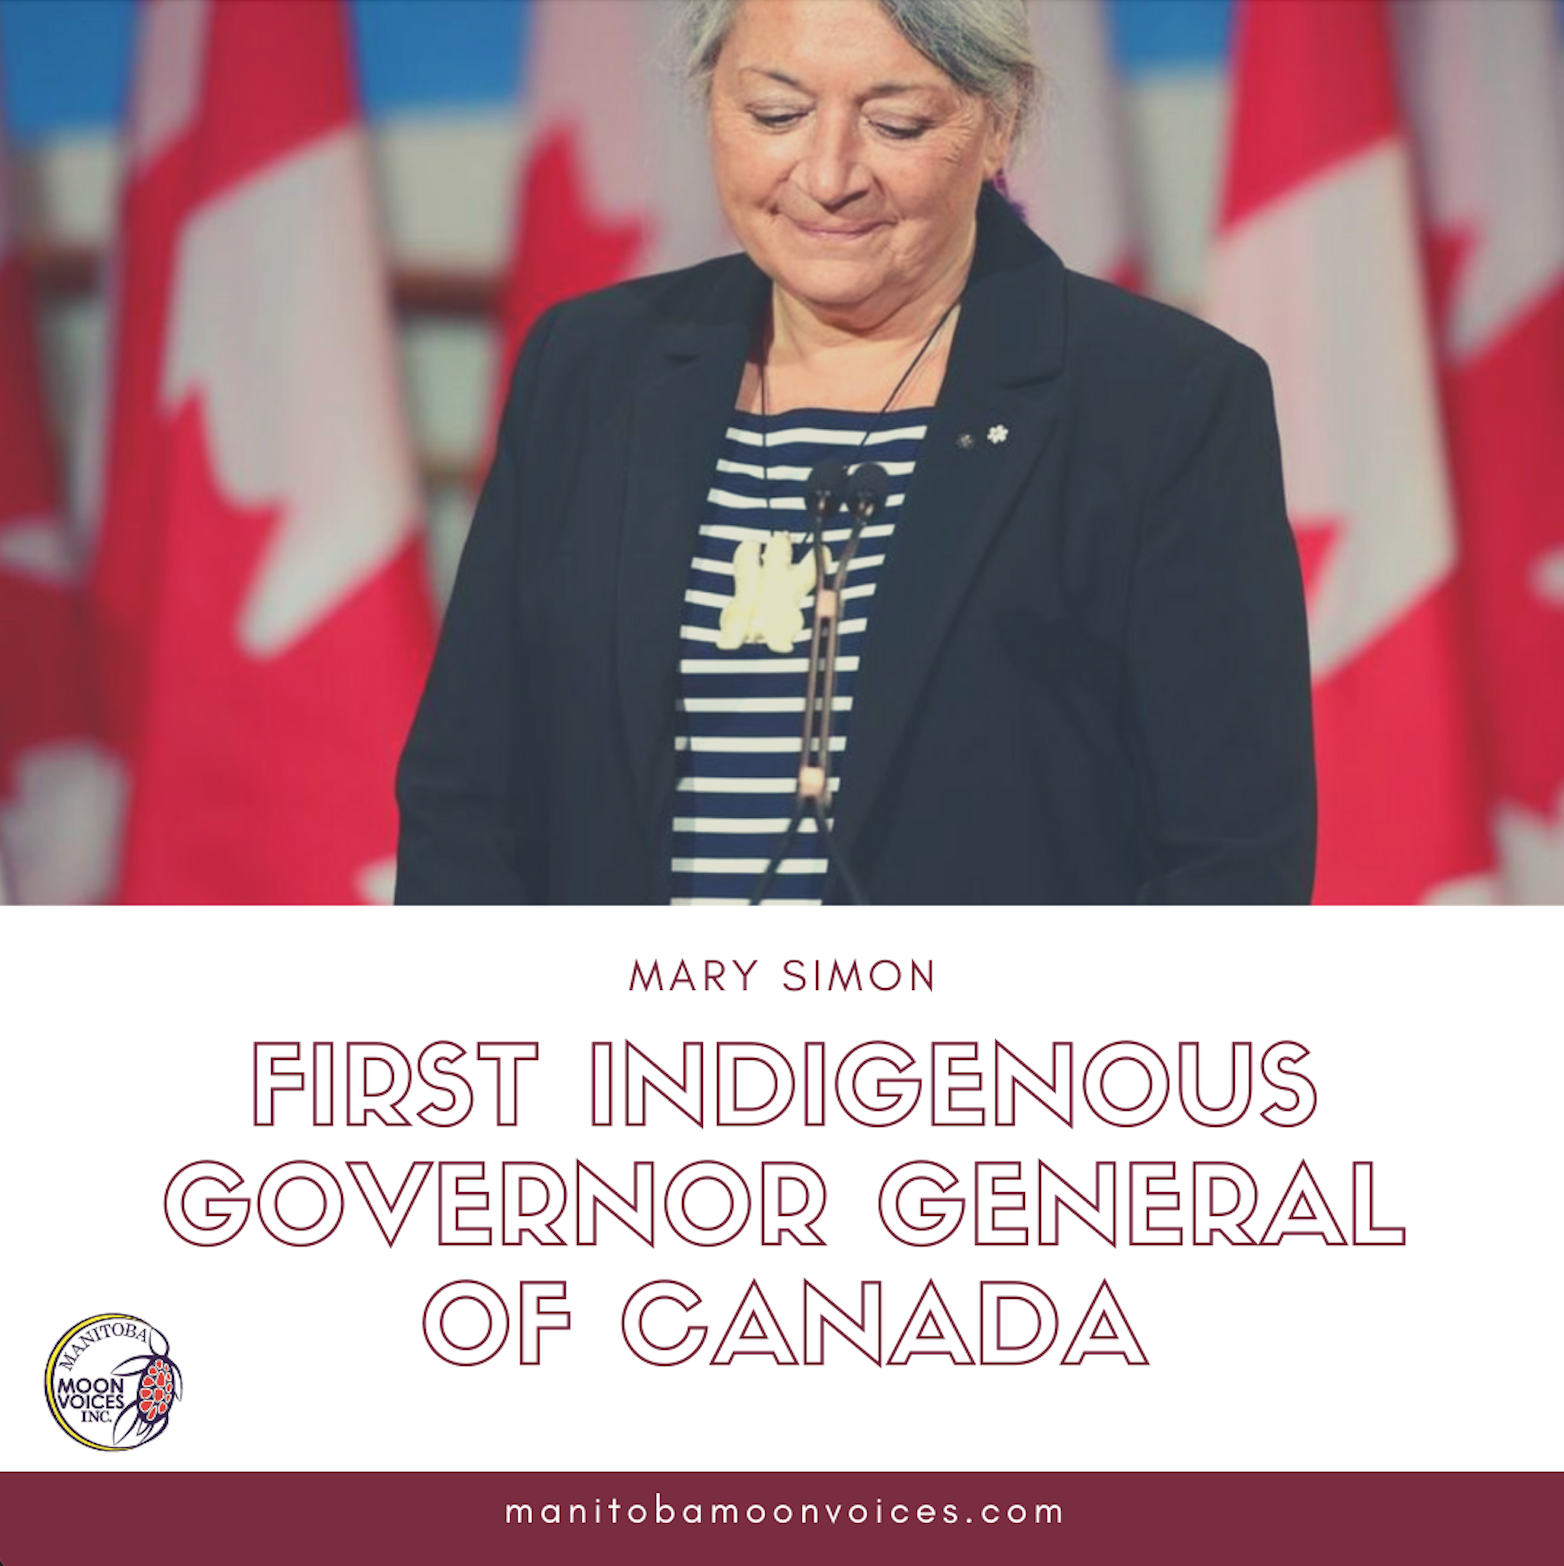 Picture of Mary Simon with the words "Mary Simon First Indigenous Governor General of Canada"